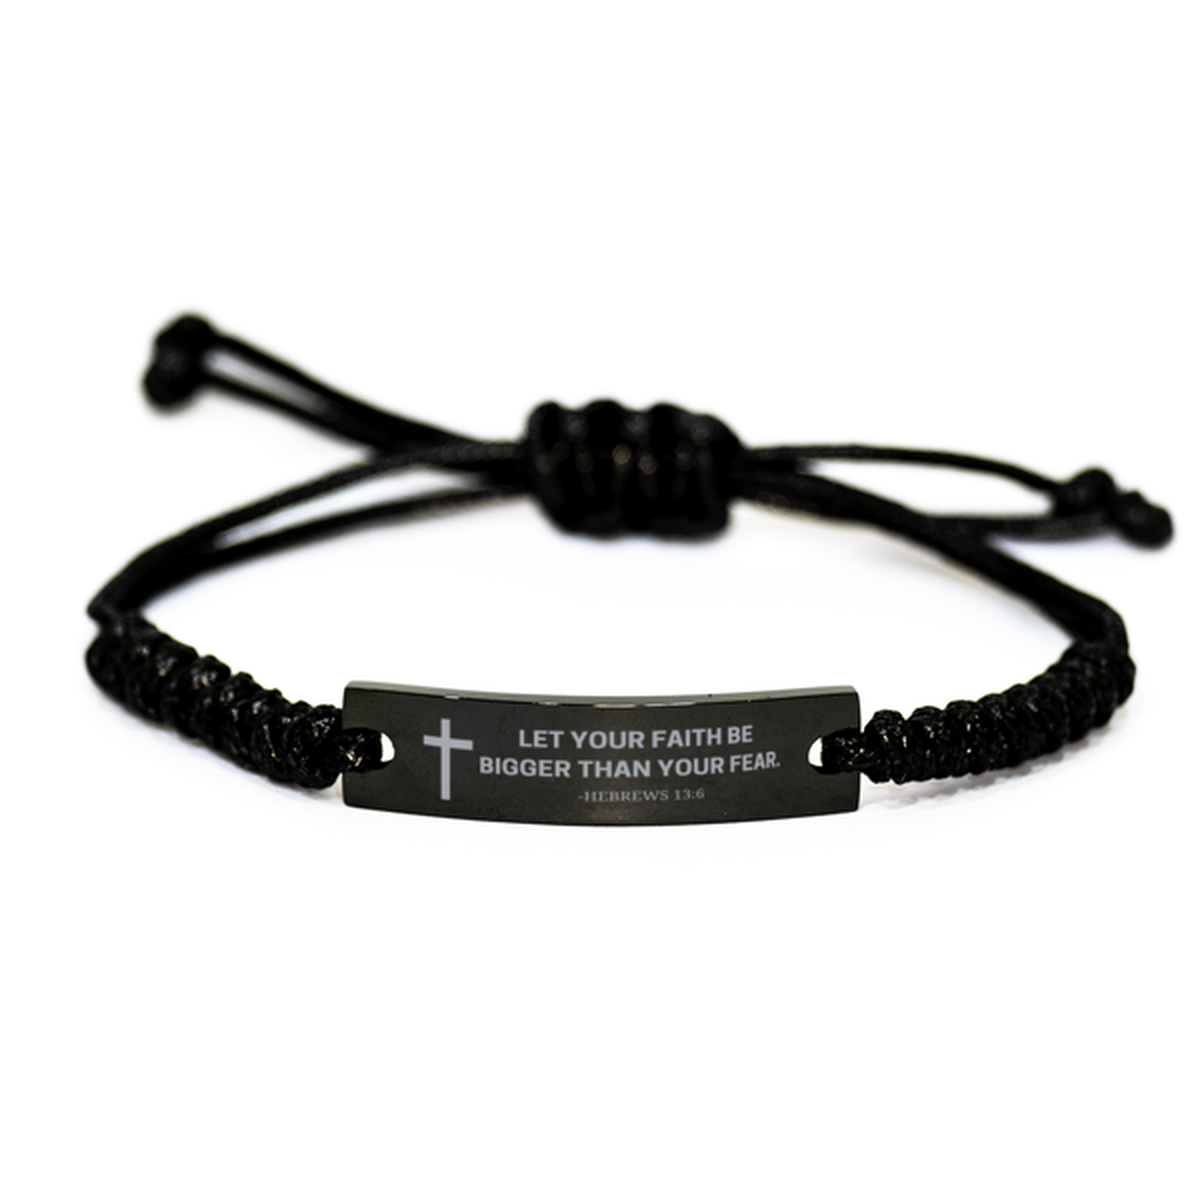 Baptism Gifts For Teenage Boys Girls, Christian Bible Verse Black Rope Bracelet, Let your faith be bigger than your fear, Catholic Confirmation Gifts for Son, Godson, Grandson, Nephew